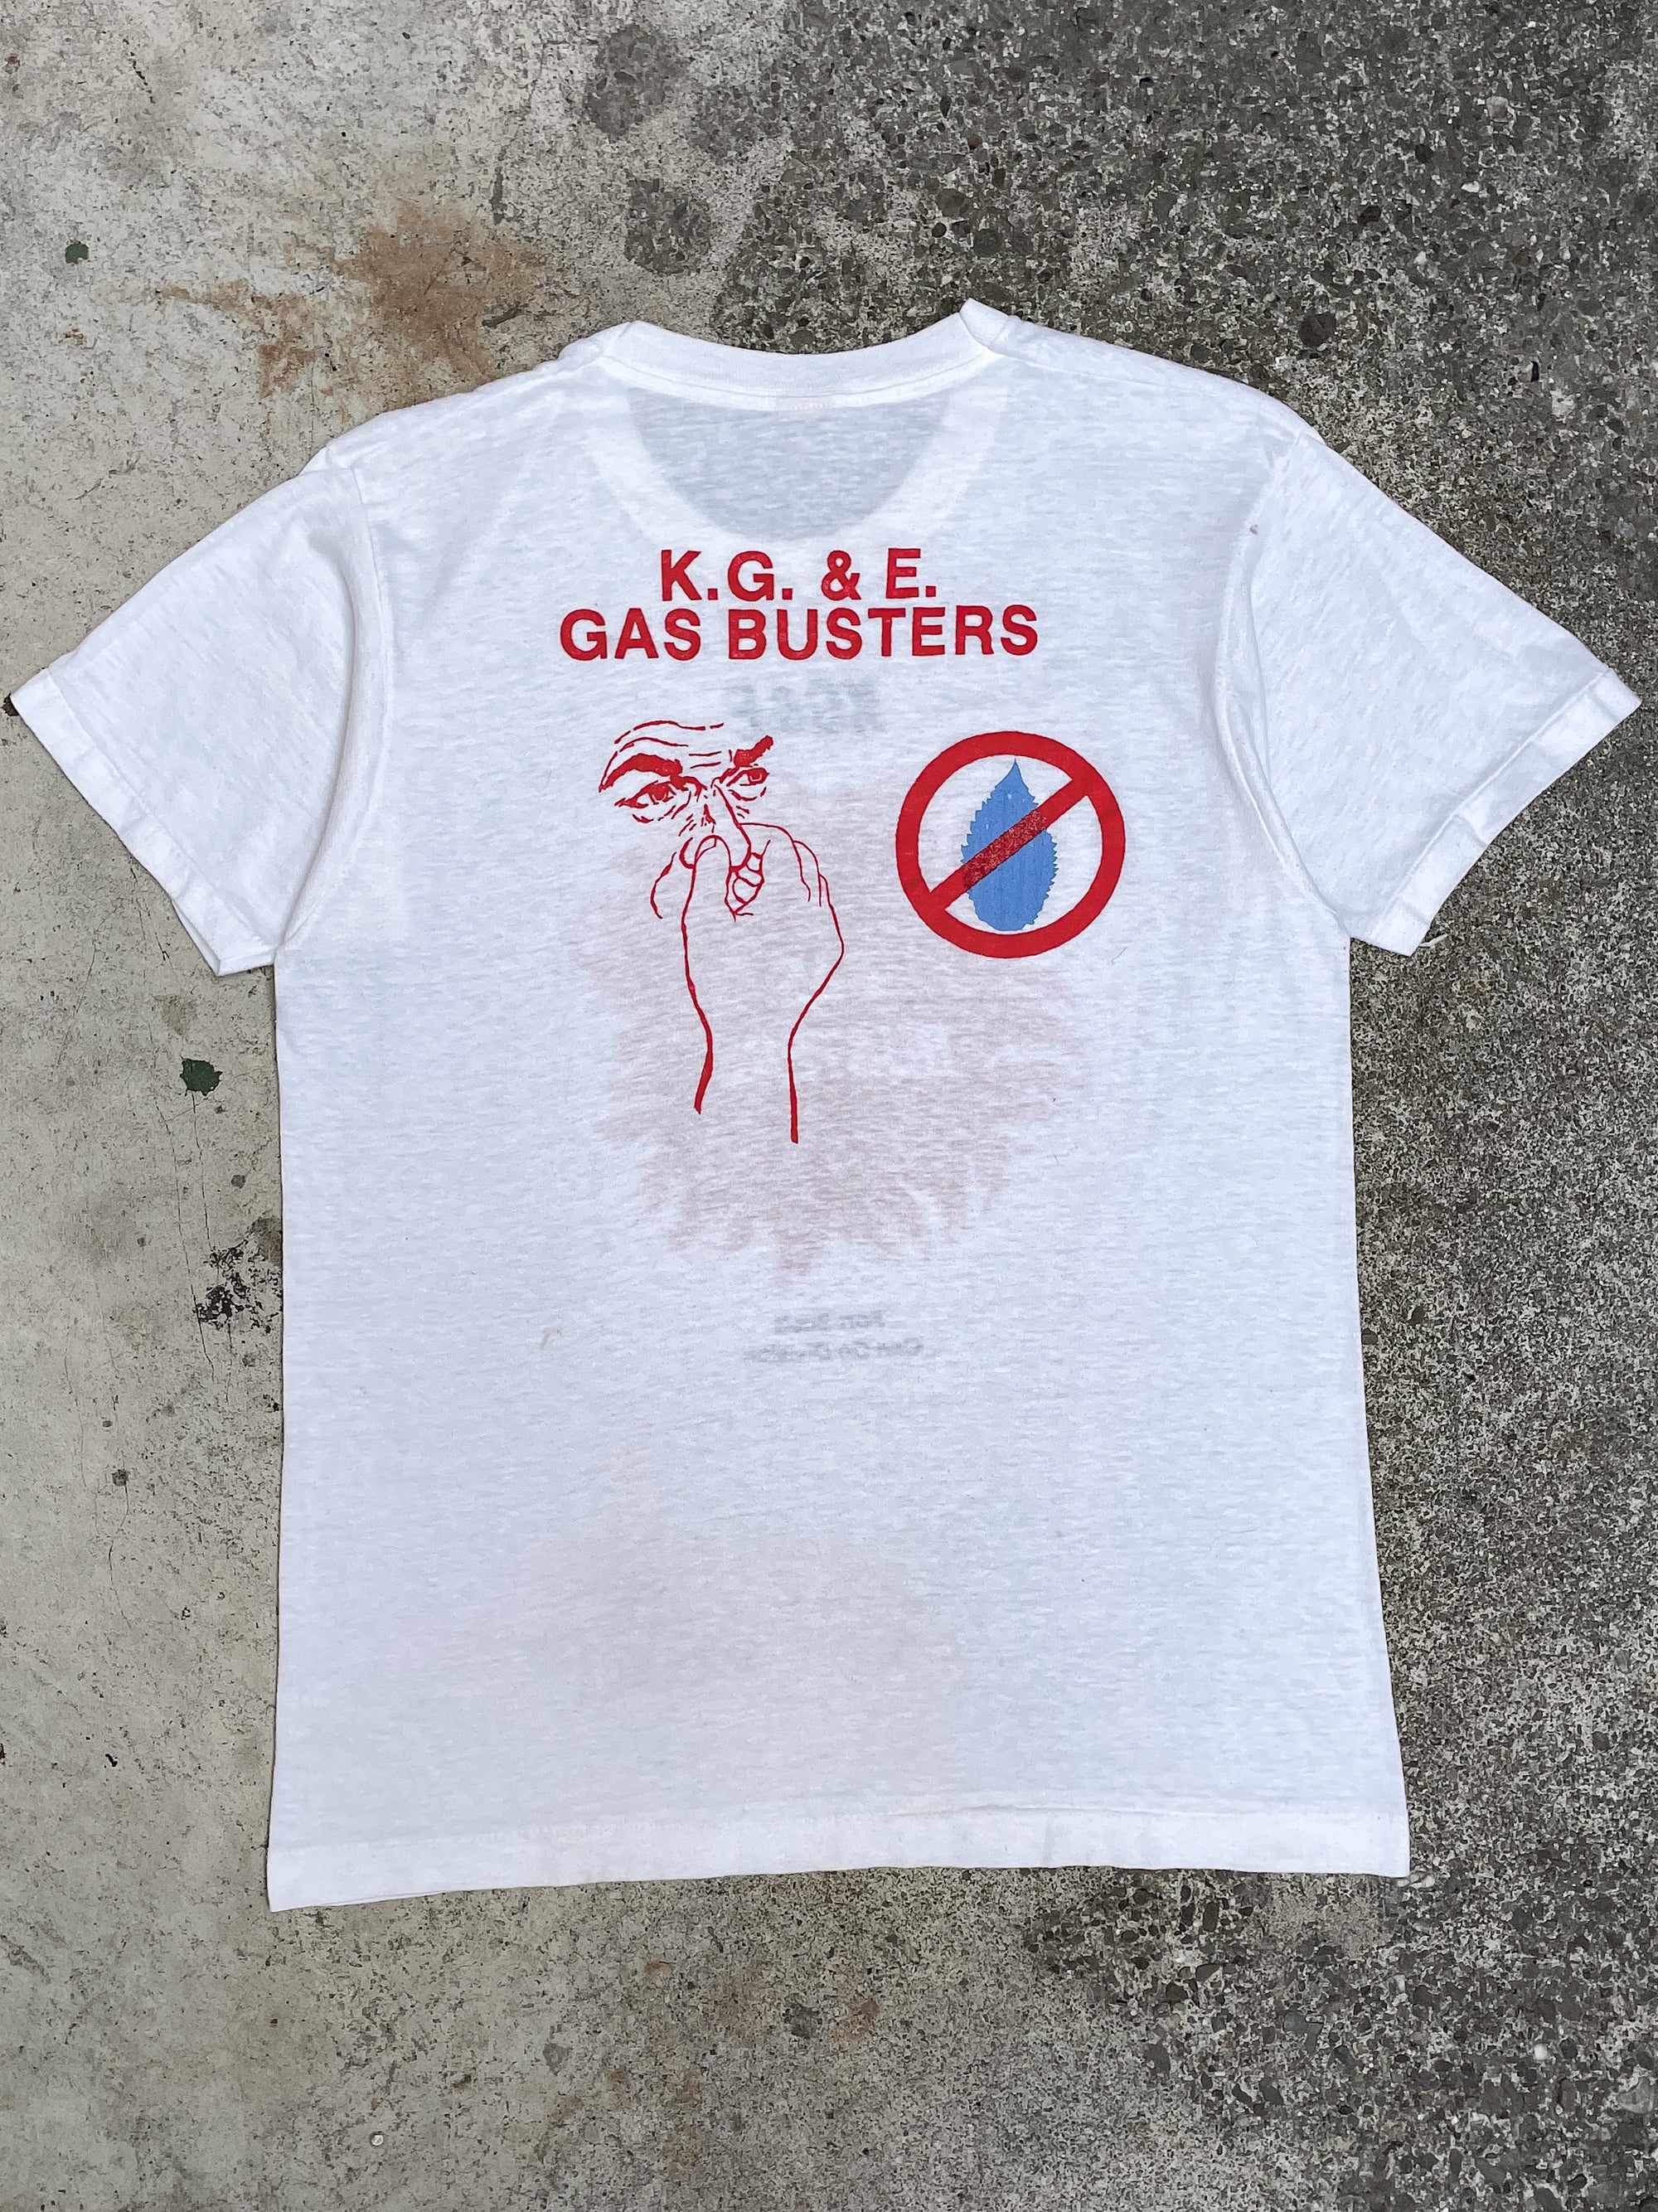 1980s “Gas Busters” Tee (M)